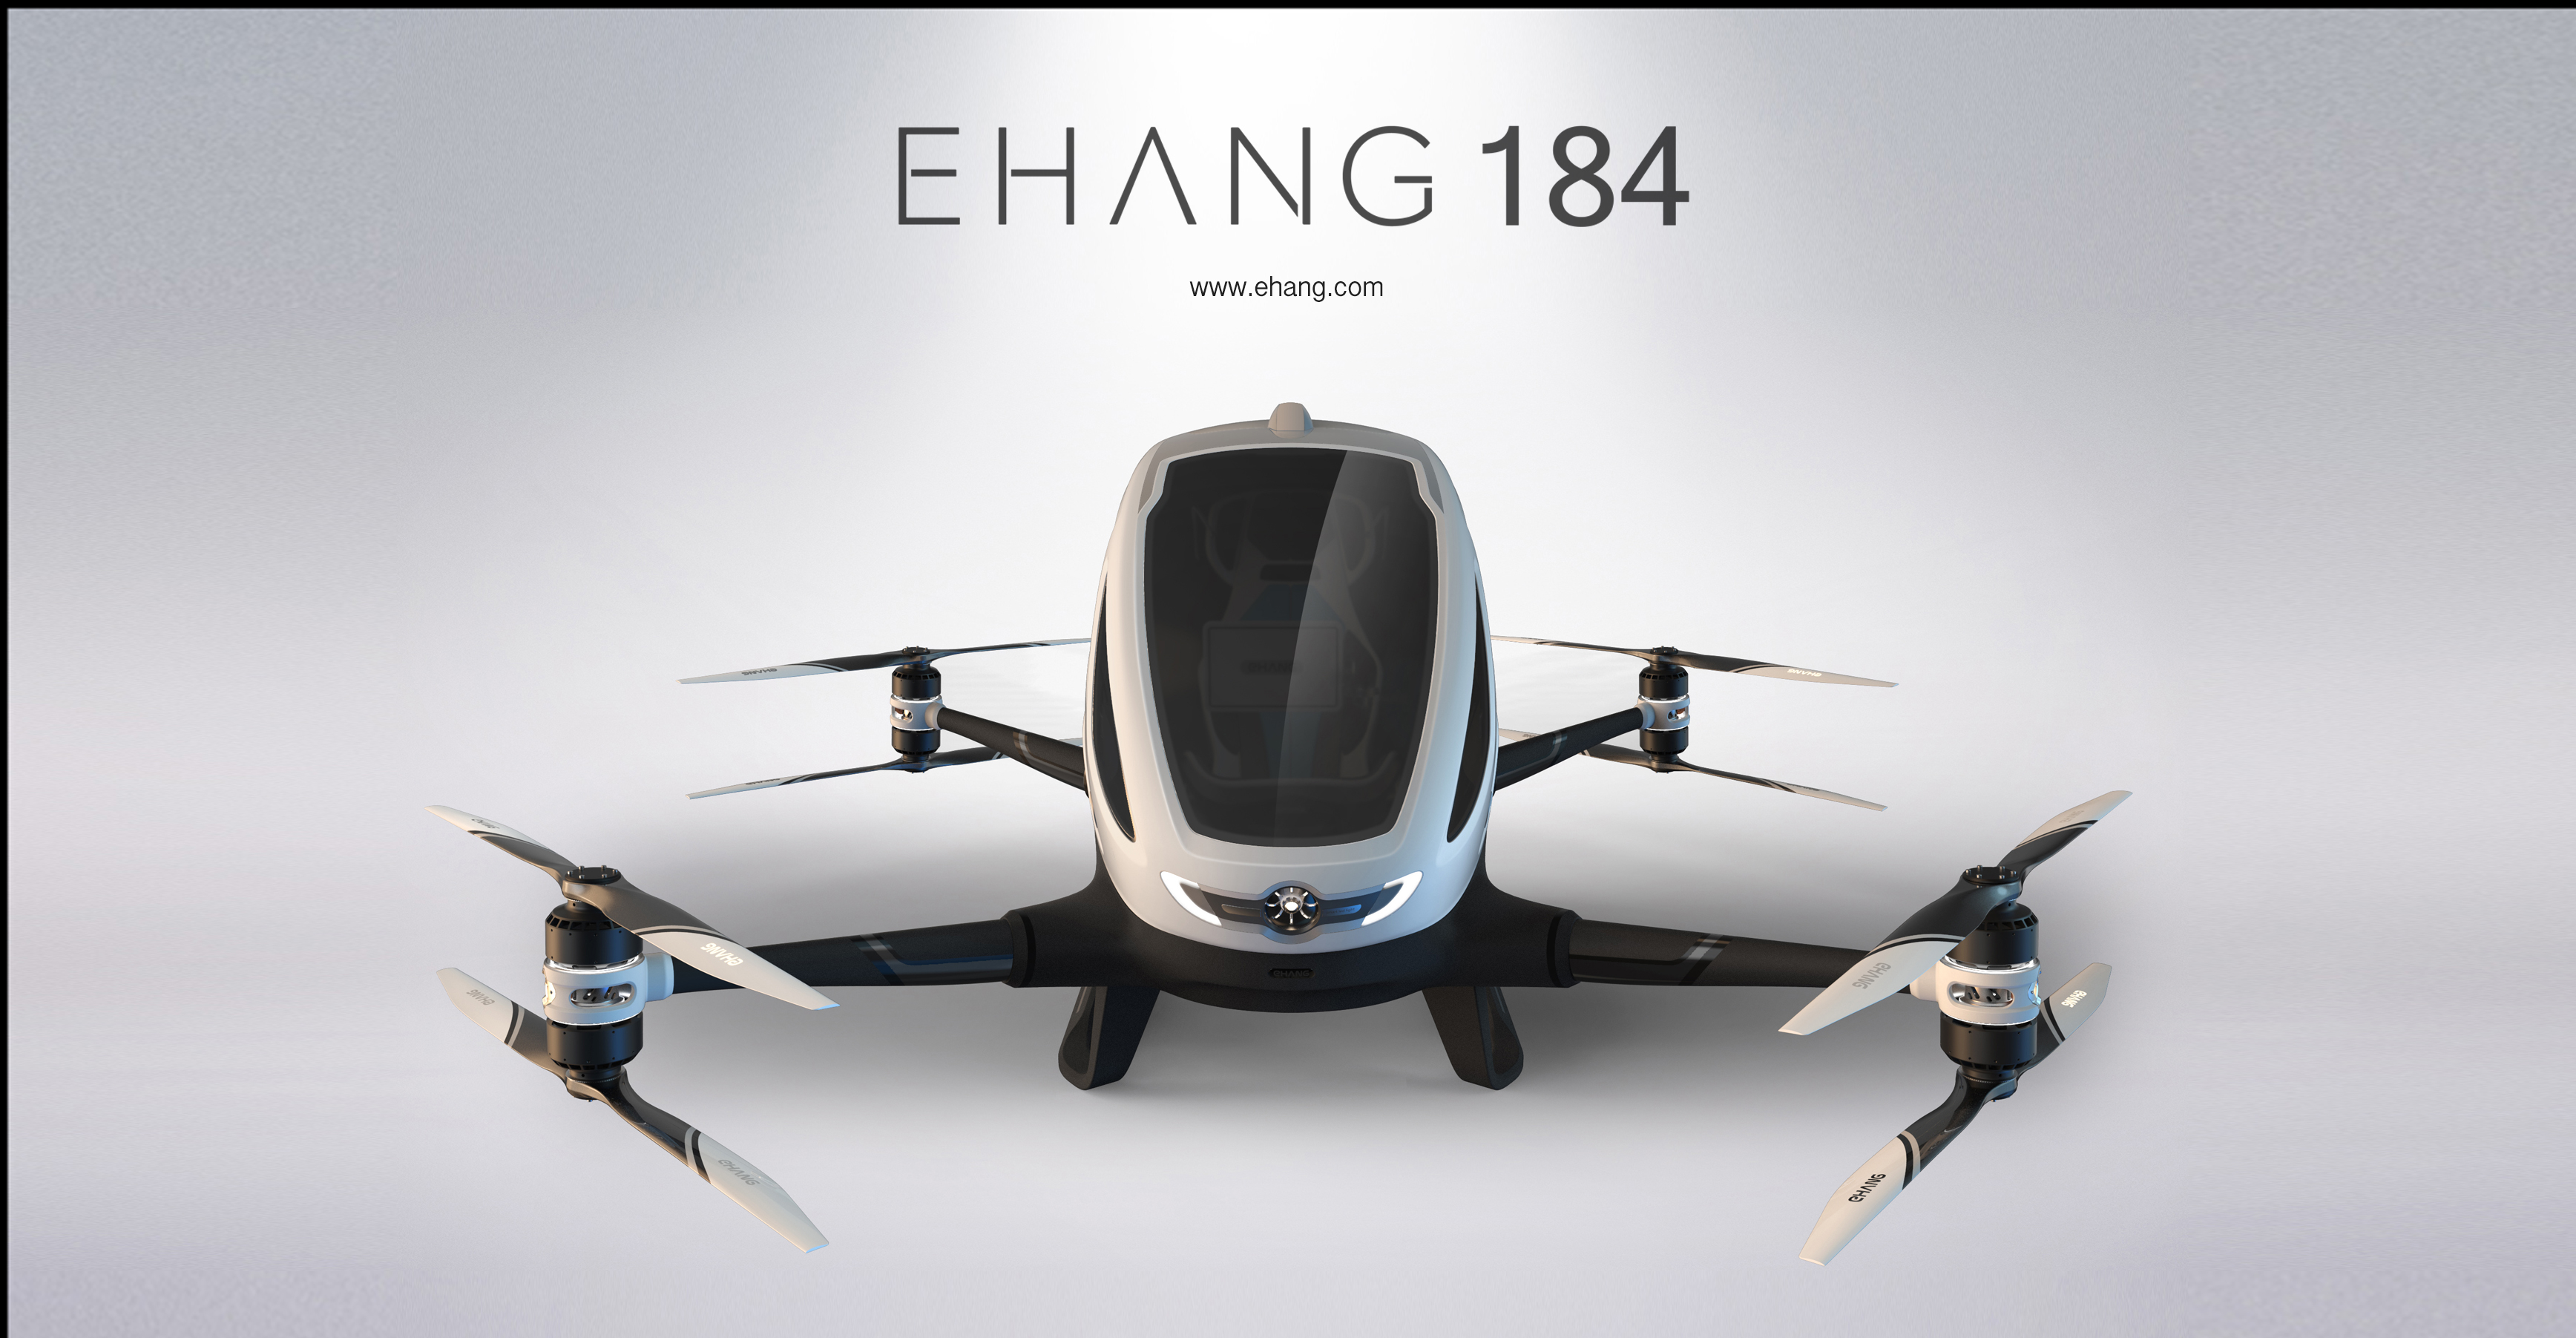 ehang 184 drone flying taxi ces 2016 1